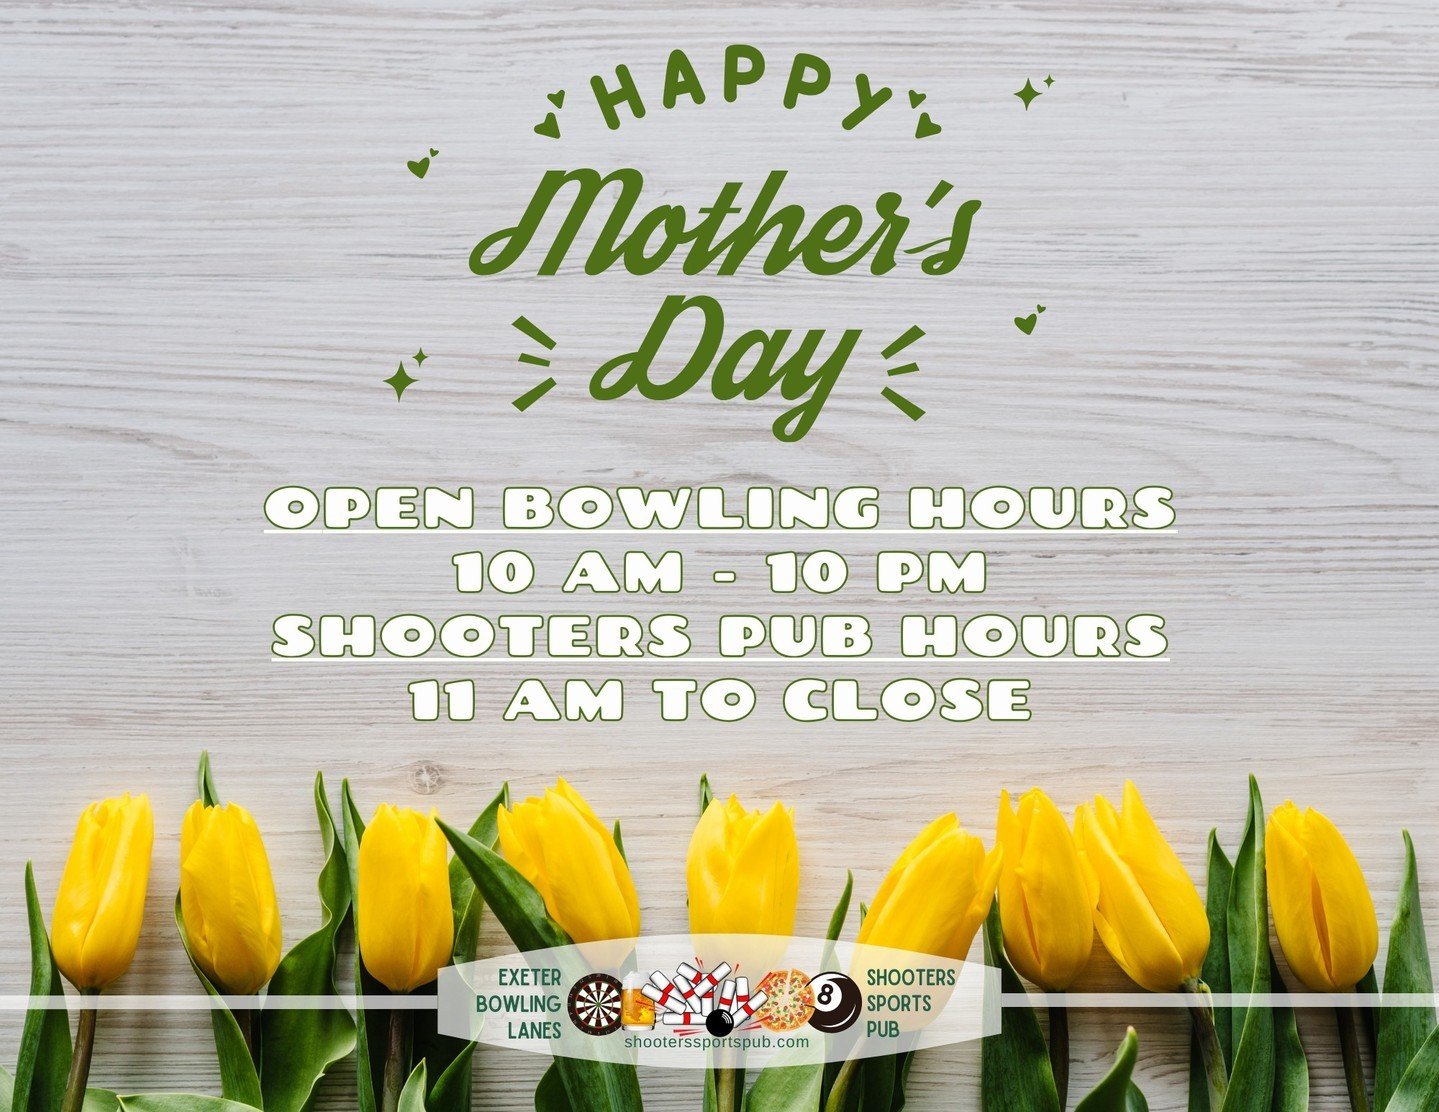 💐🍻 To all the maternal role models out there, Happy Mother's Day from all of us at Shooters Pub and Exeter Lanes! ⁠
⁠
Whether it's family time or your own time-out, we're here for you. 🎳🧘&zwj;♀️ ⁠
⁠
#MothersDayMagic #FamilyOrMeTime⁠